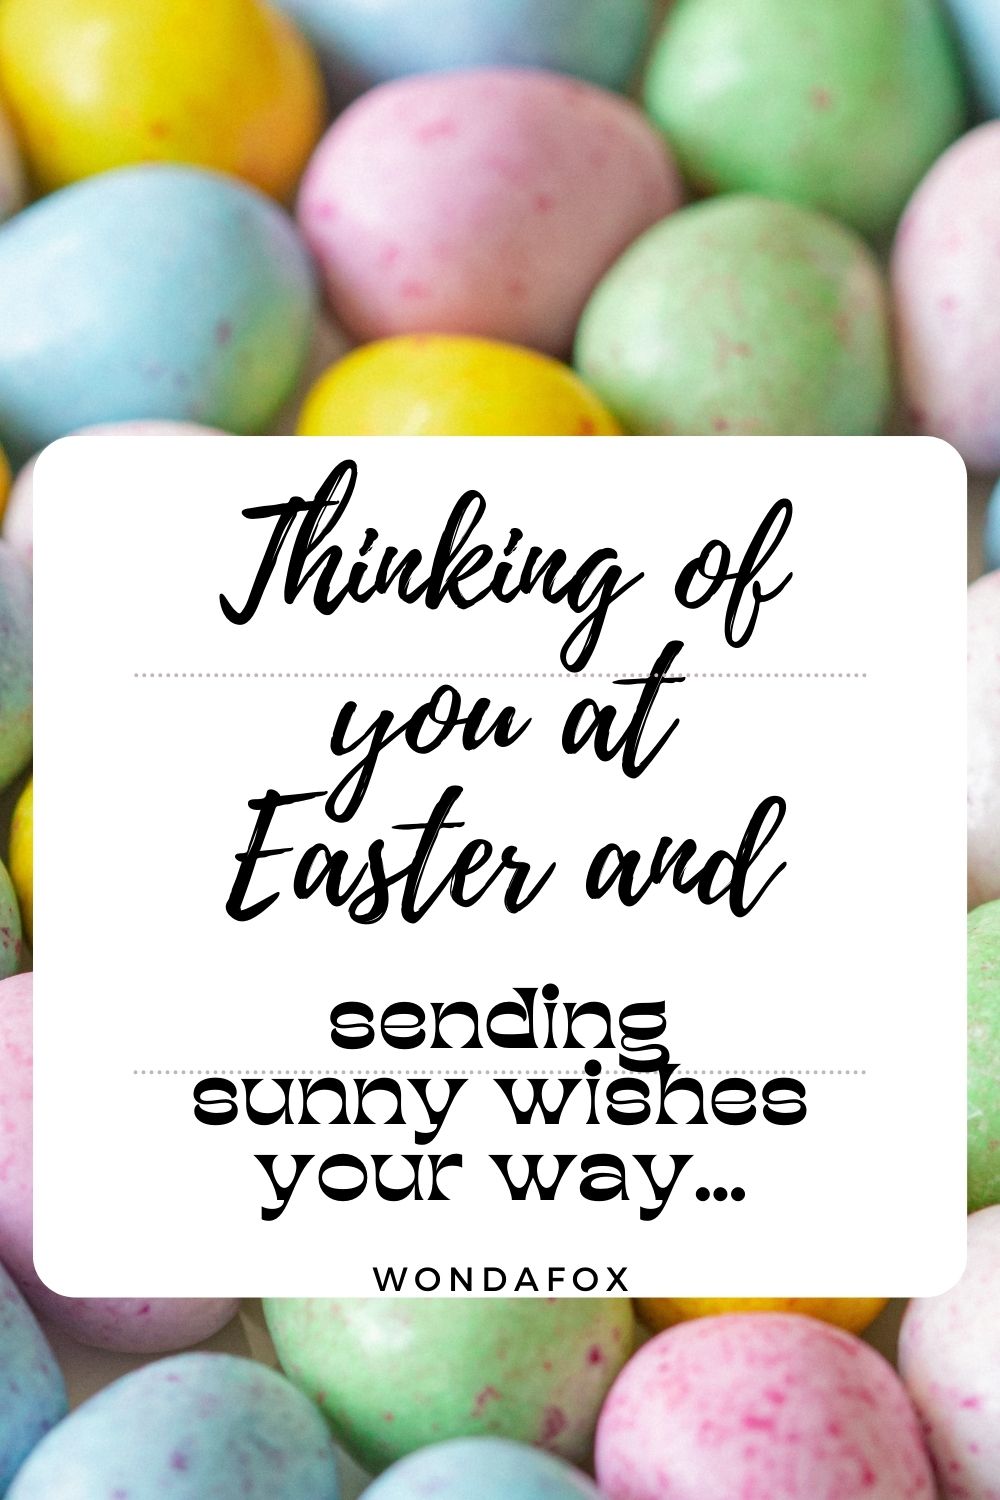 Thinking of you at Easter and sending sunny wishes your way…